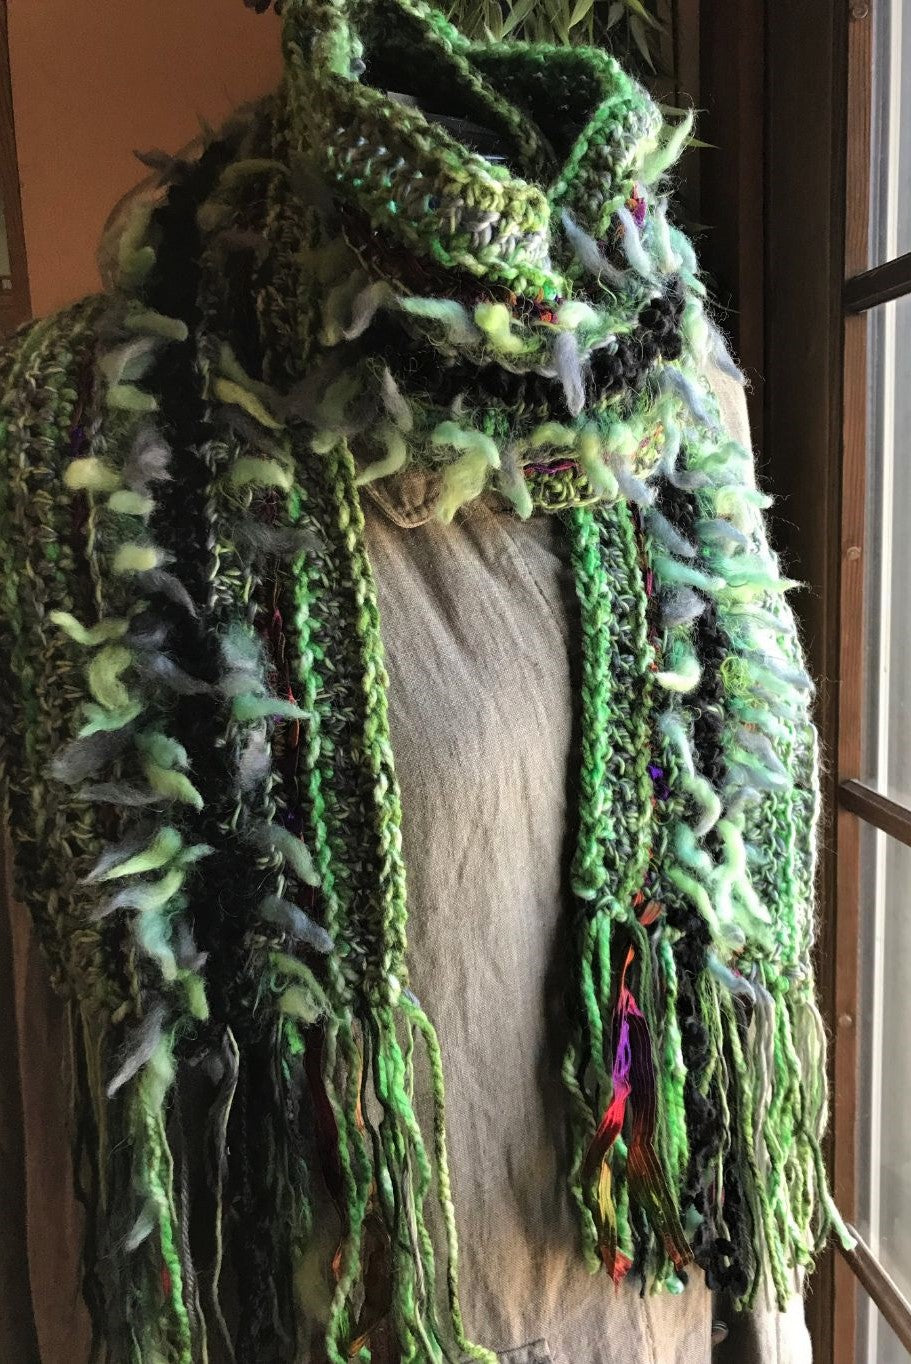 Crocheted Scarf Green with Black Accent Art Yarns